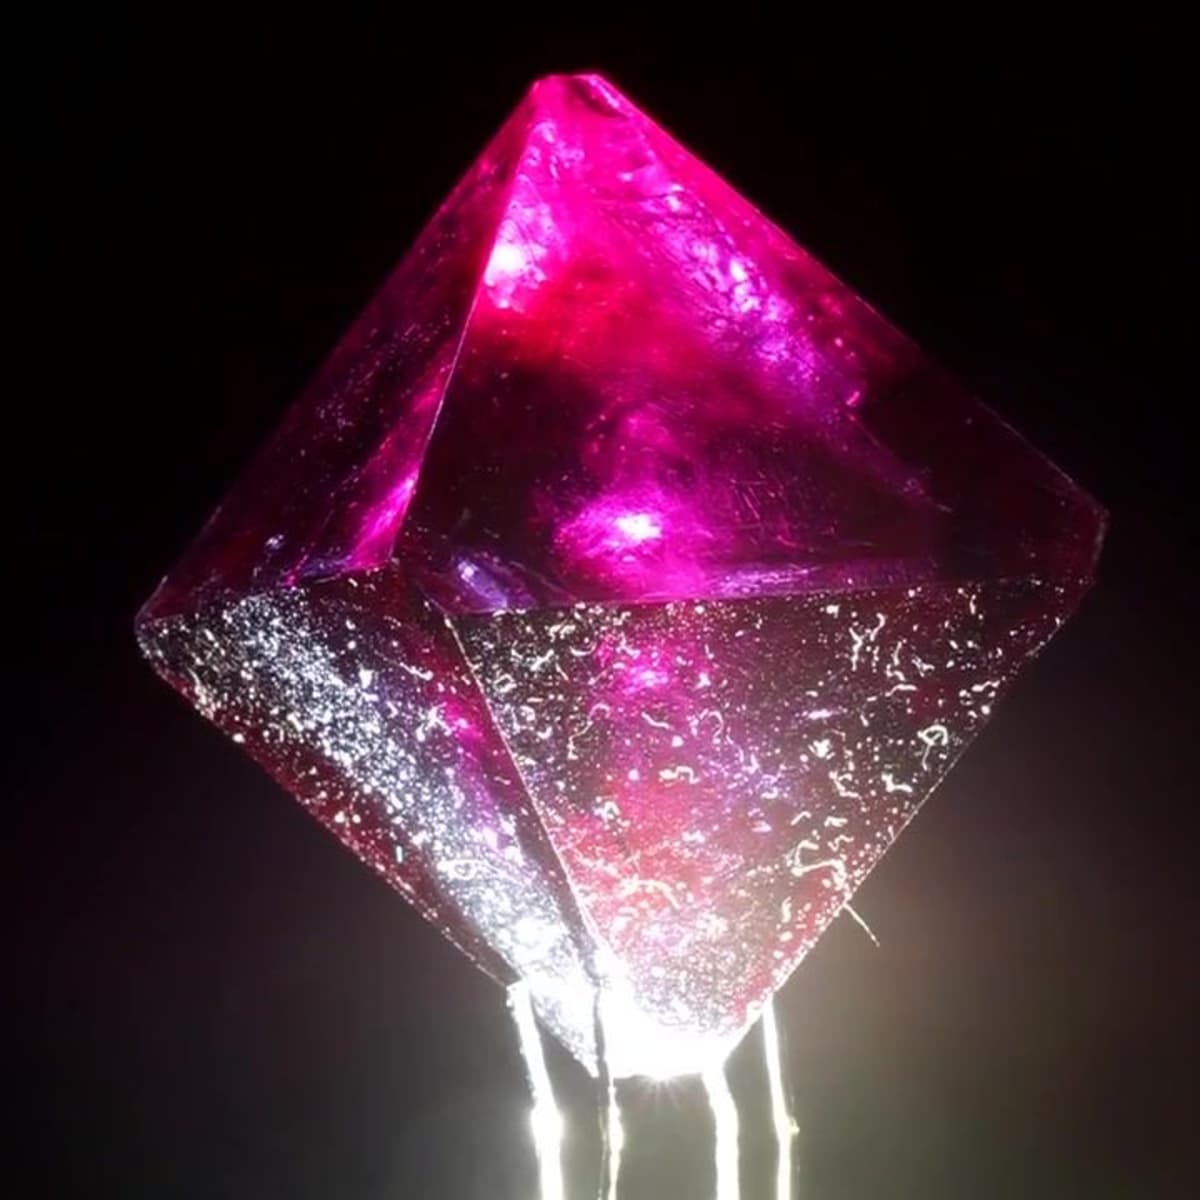 How to Make Crystals at Home